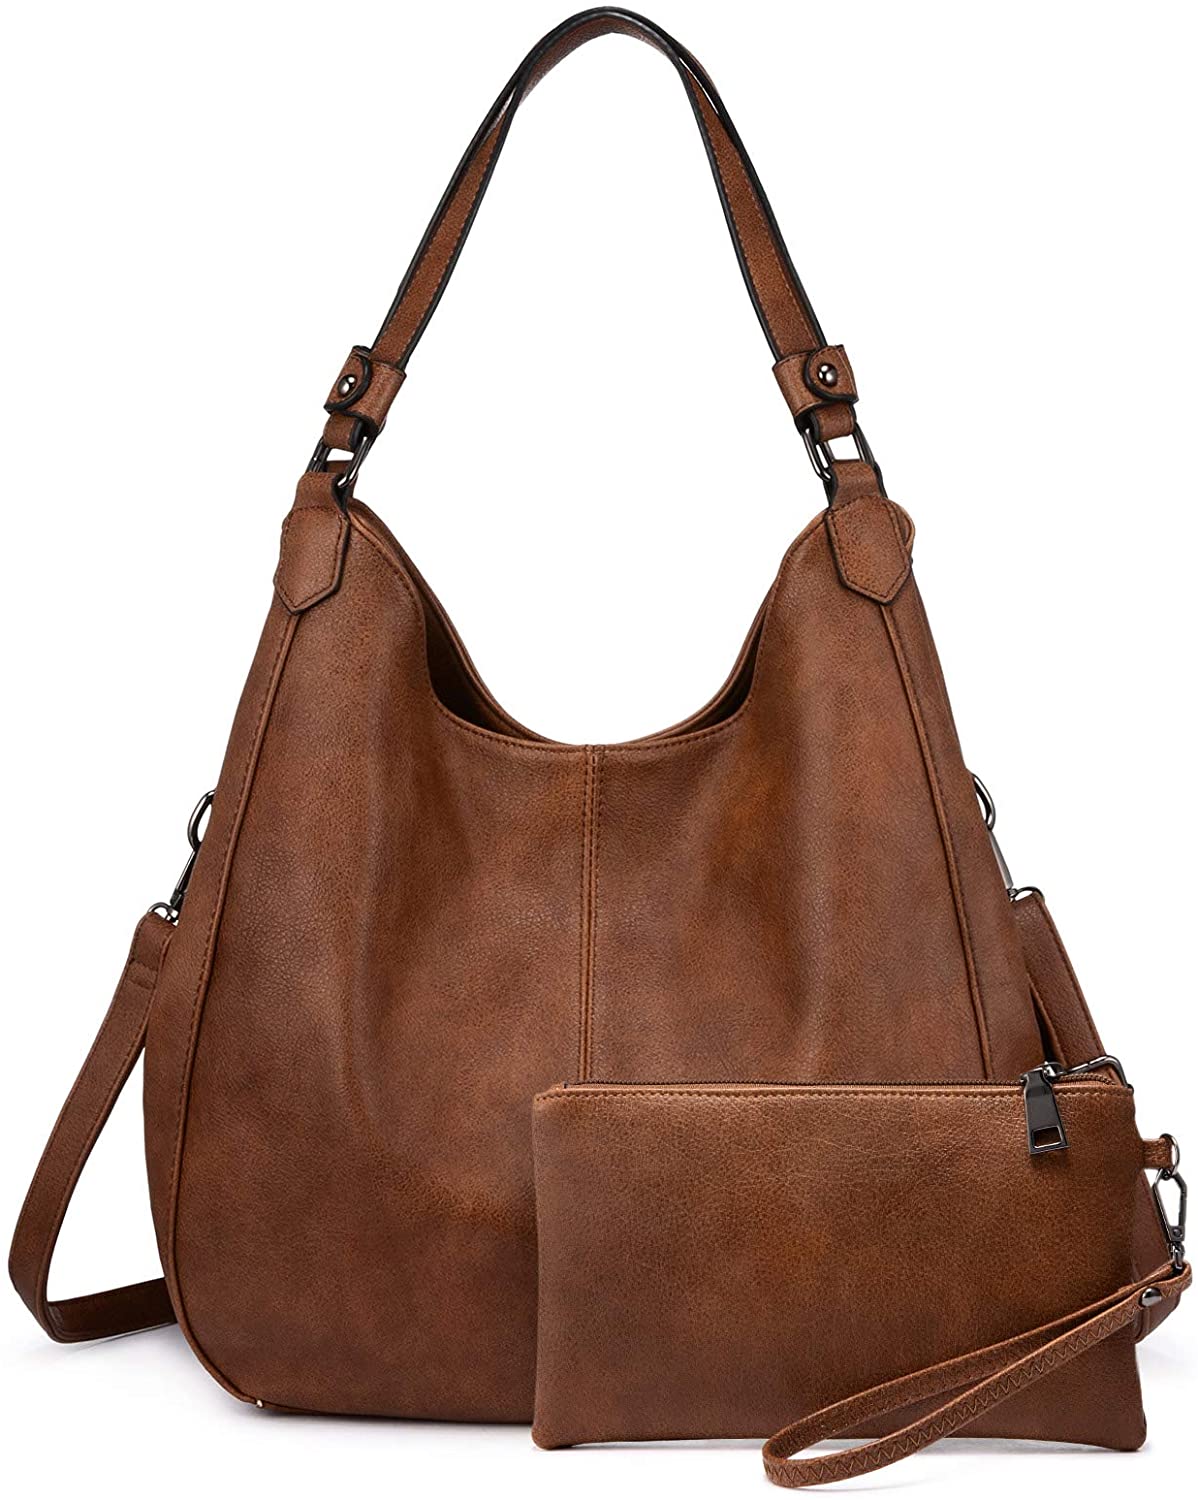 30 Most Hottest Hobo Bags These Days - Canvas Bag Leather Bag CanvasBag.Co  | Leather hobo bags, Natural leather bag, Bags